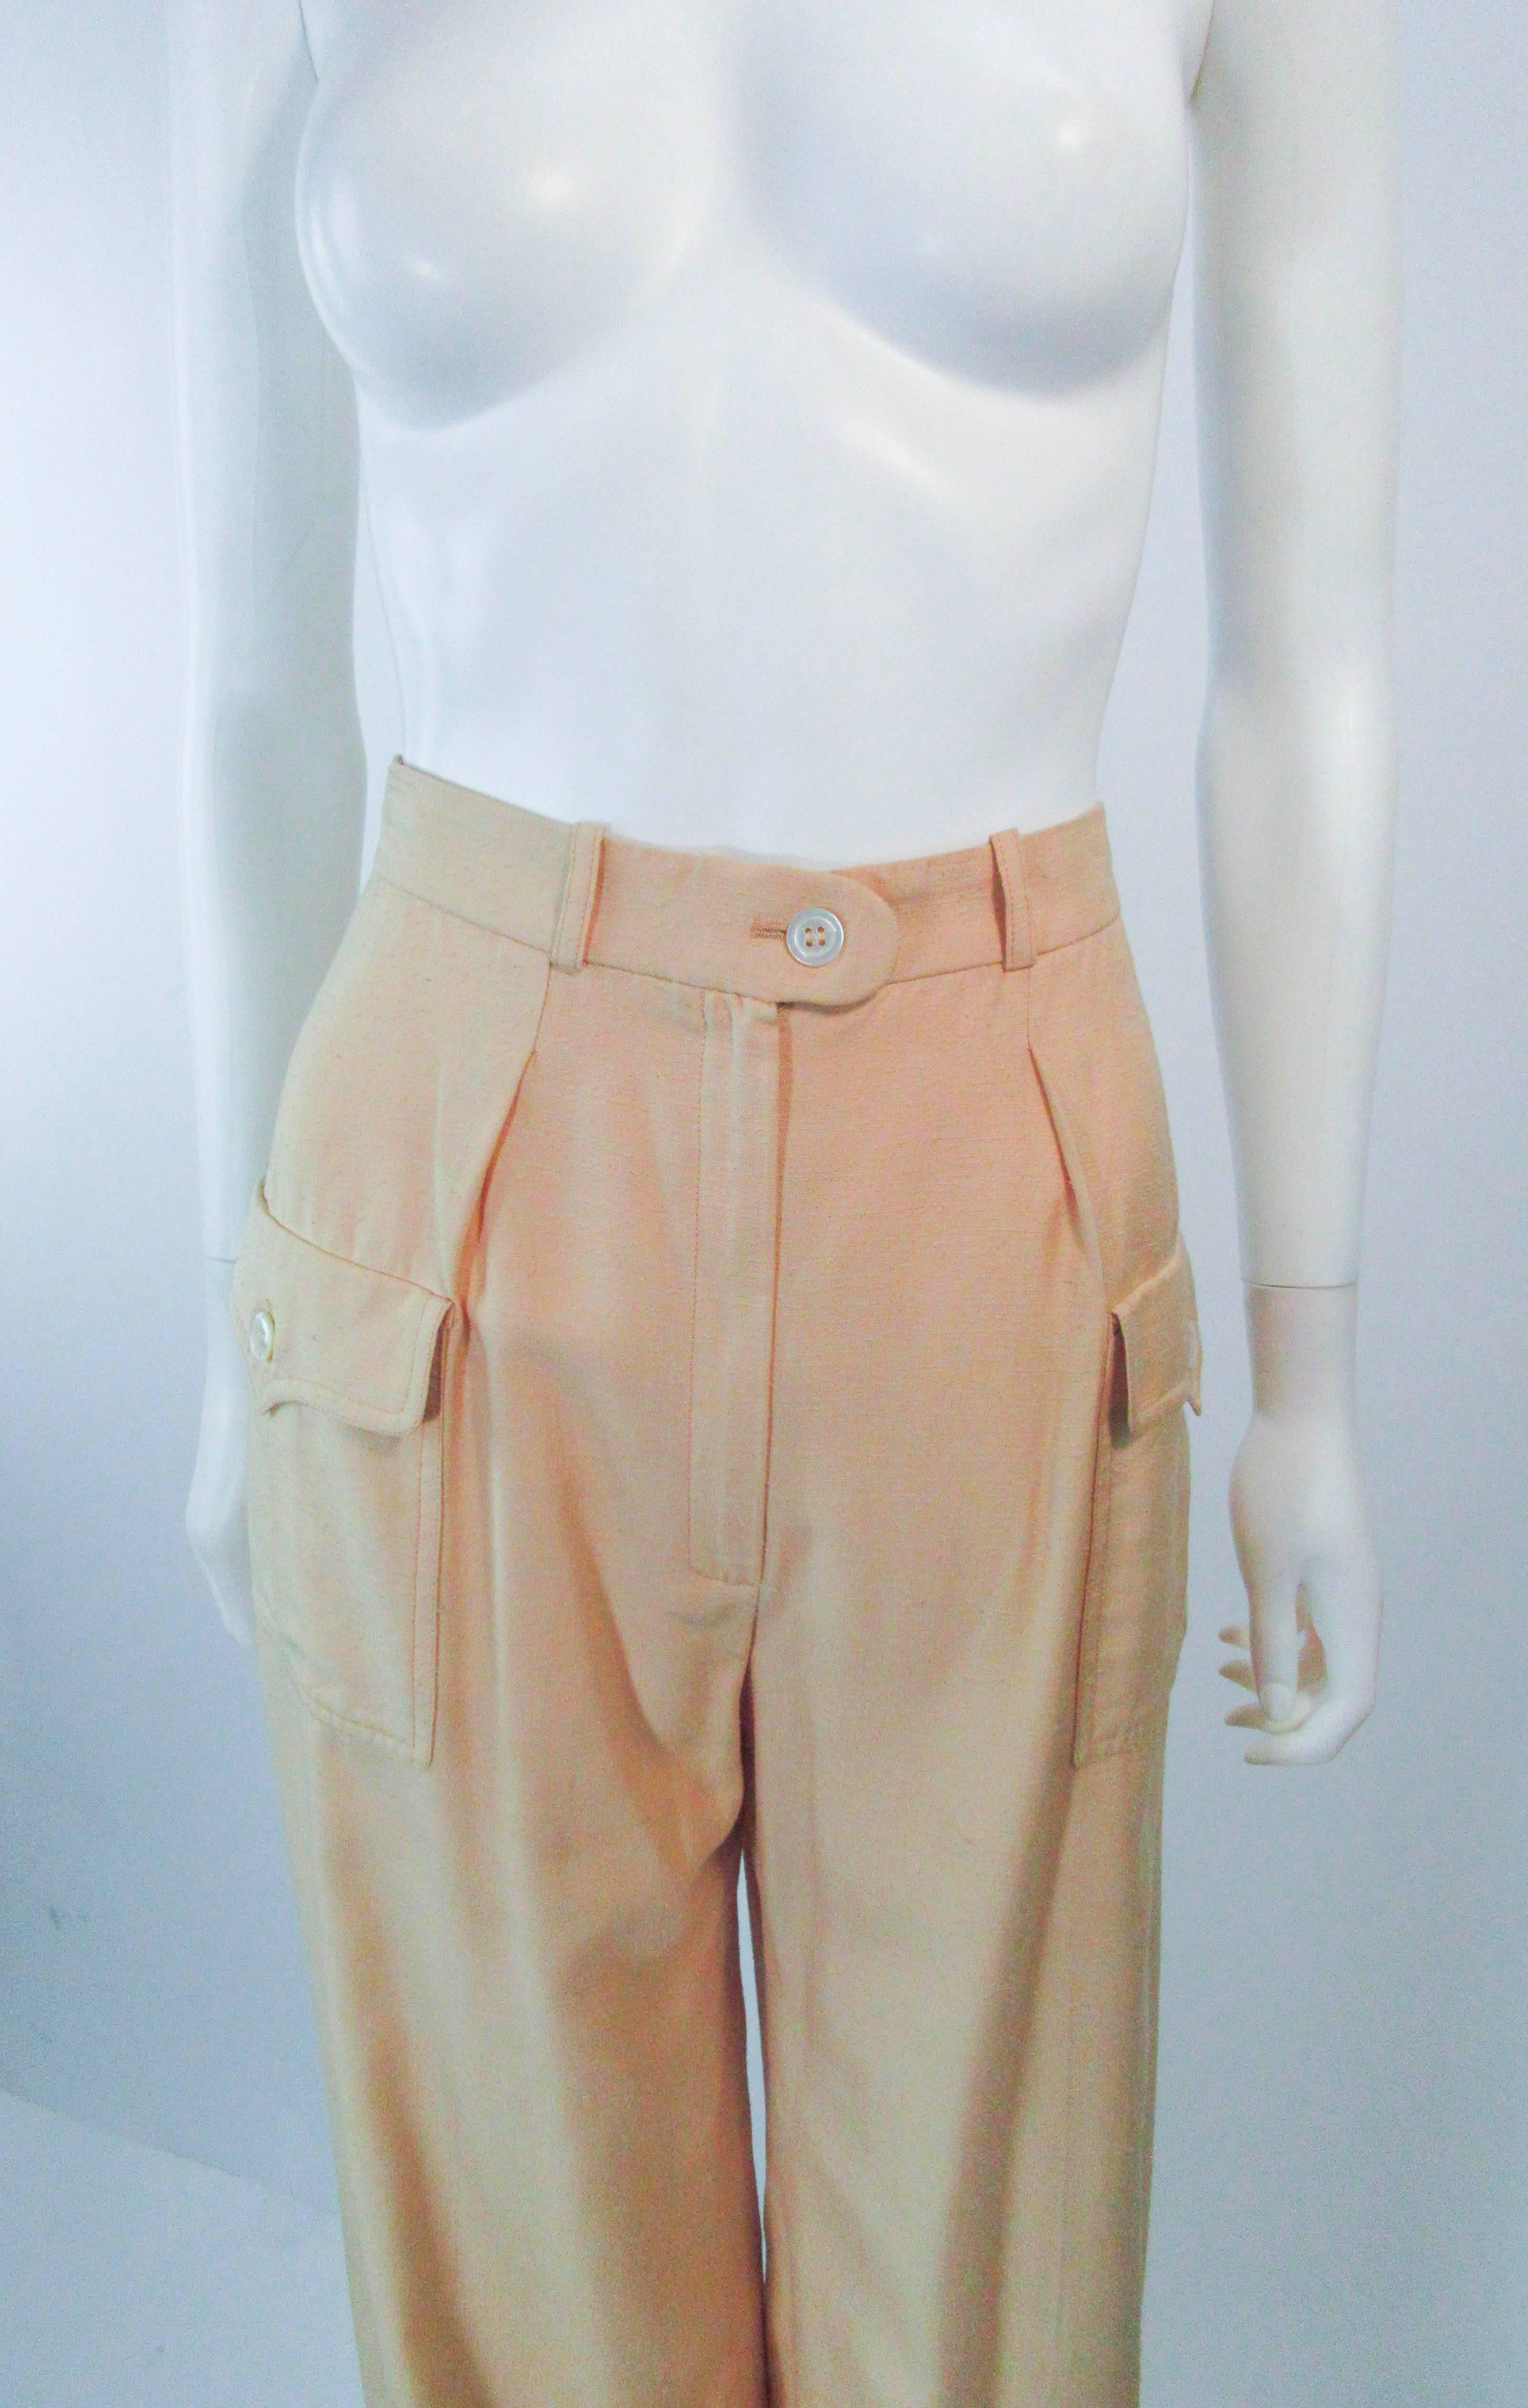 These Valentino pants are composed of a raw silk in a natural khaki color. Features a safari style with side pockets. There is a zipper closure. In good vintage condition, they are un-hemmed. 

  **Please cross-reference measurements for personal